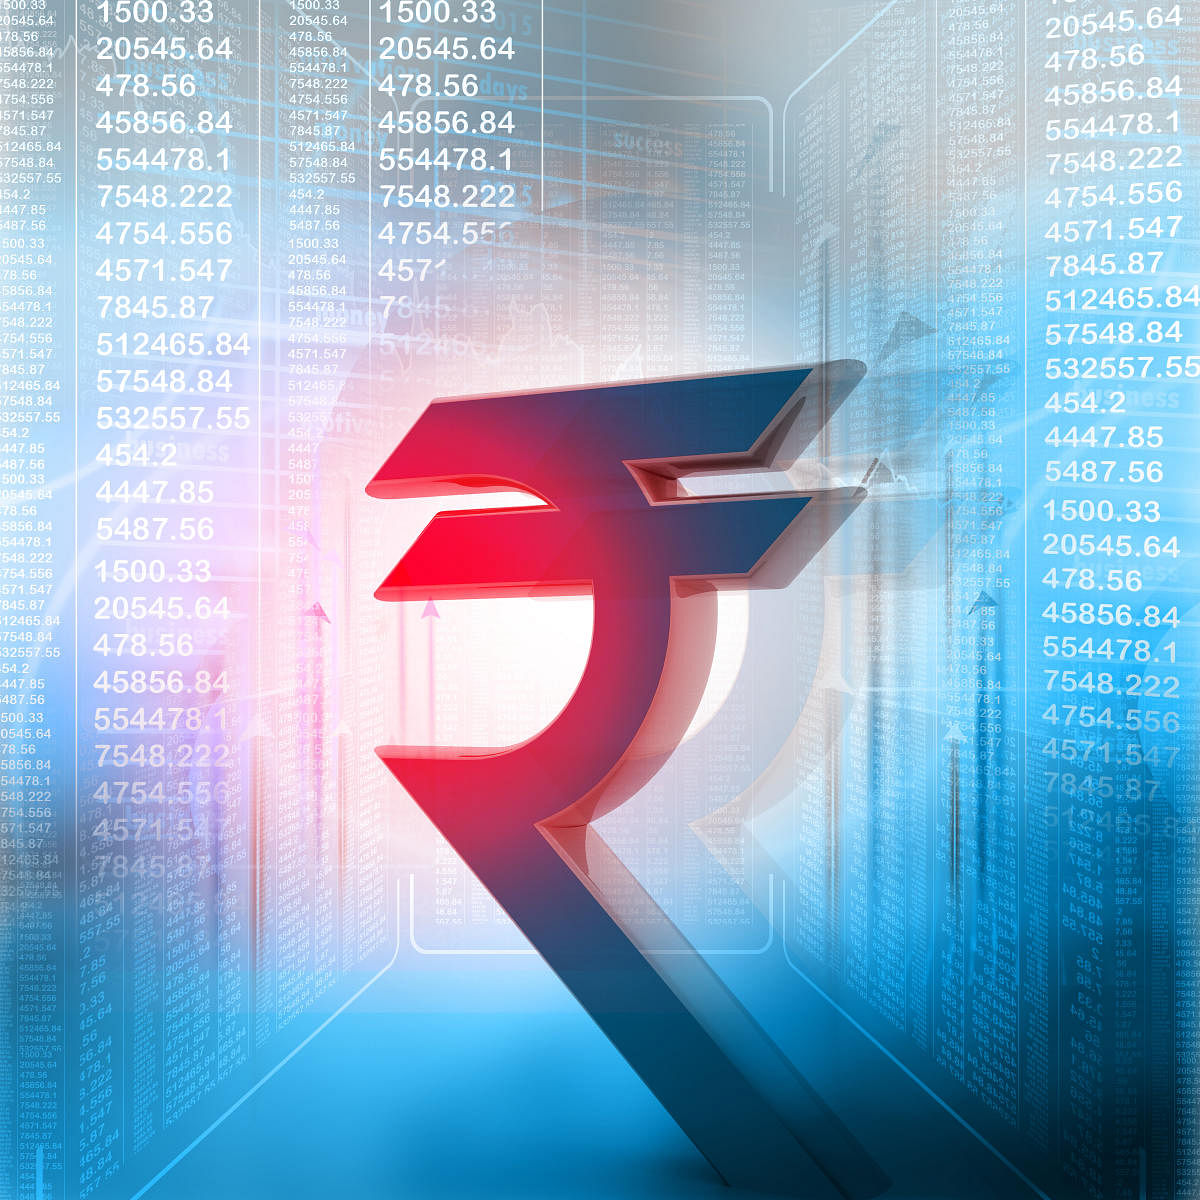 Traders said unabated foreign fund inflows too supported the recovery in the Indian rupee.